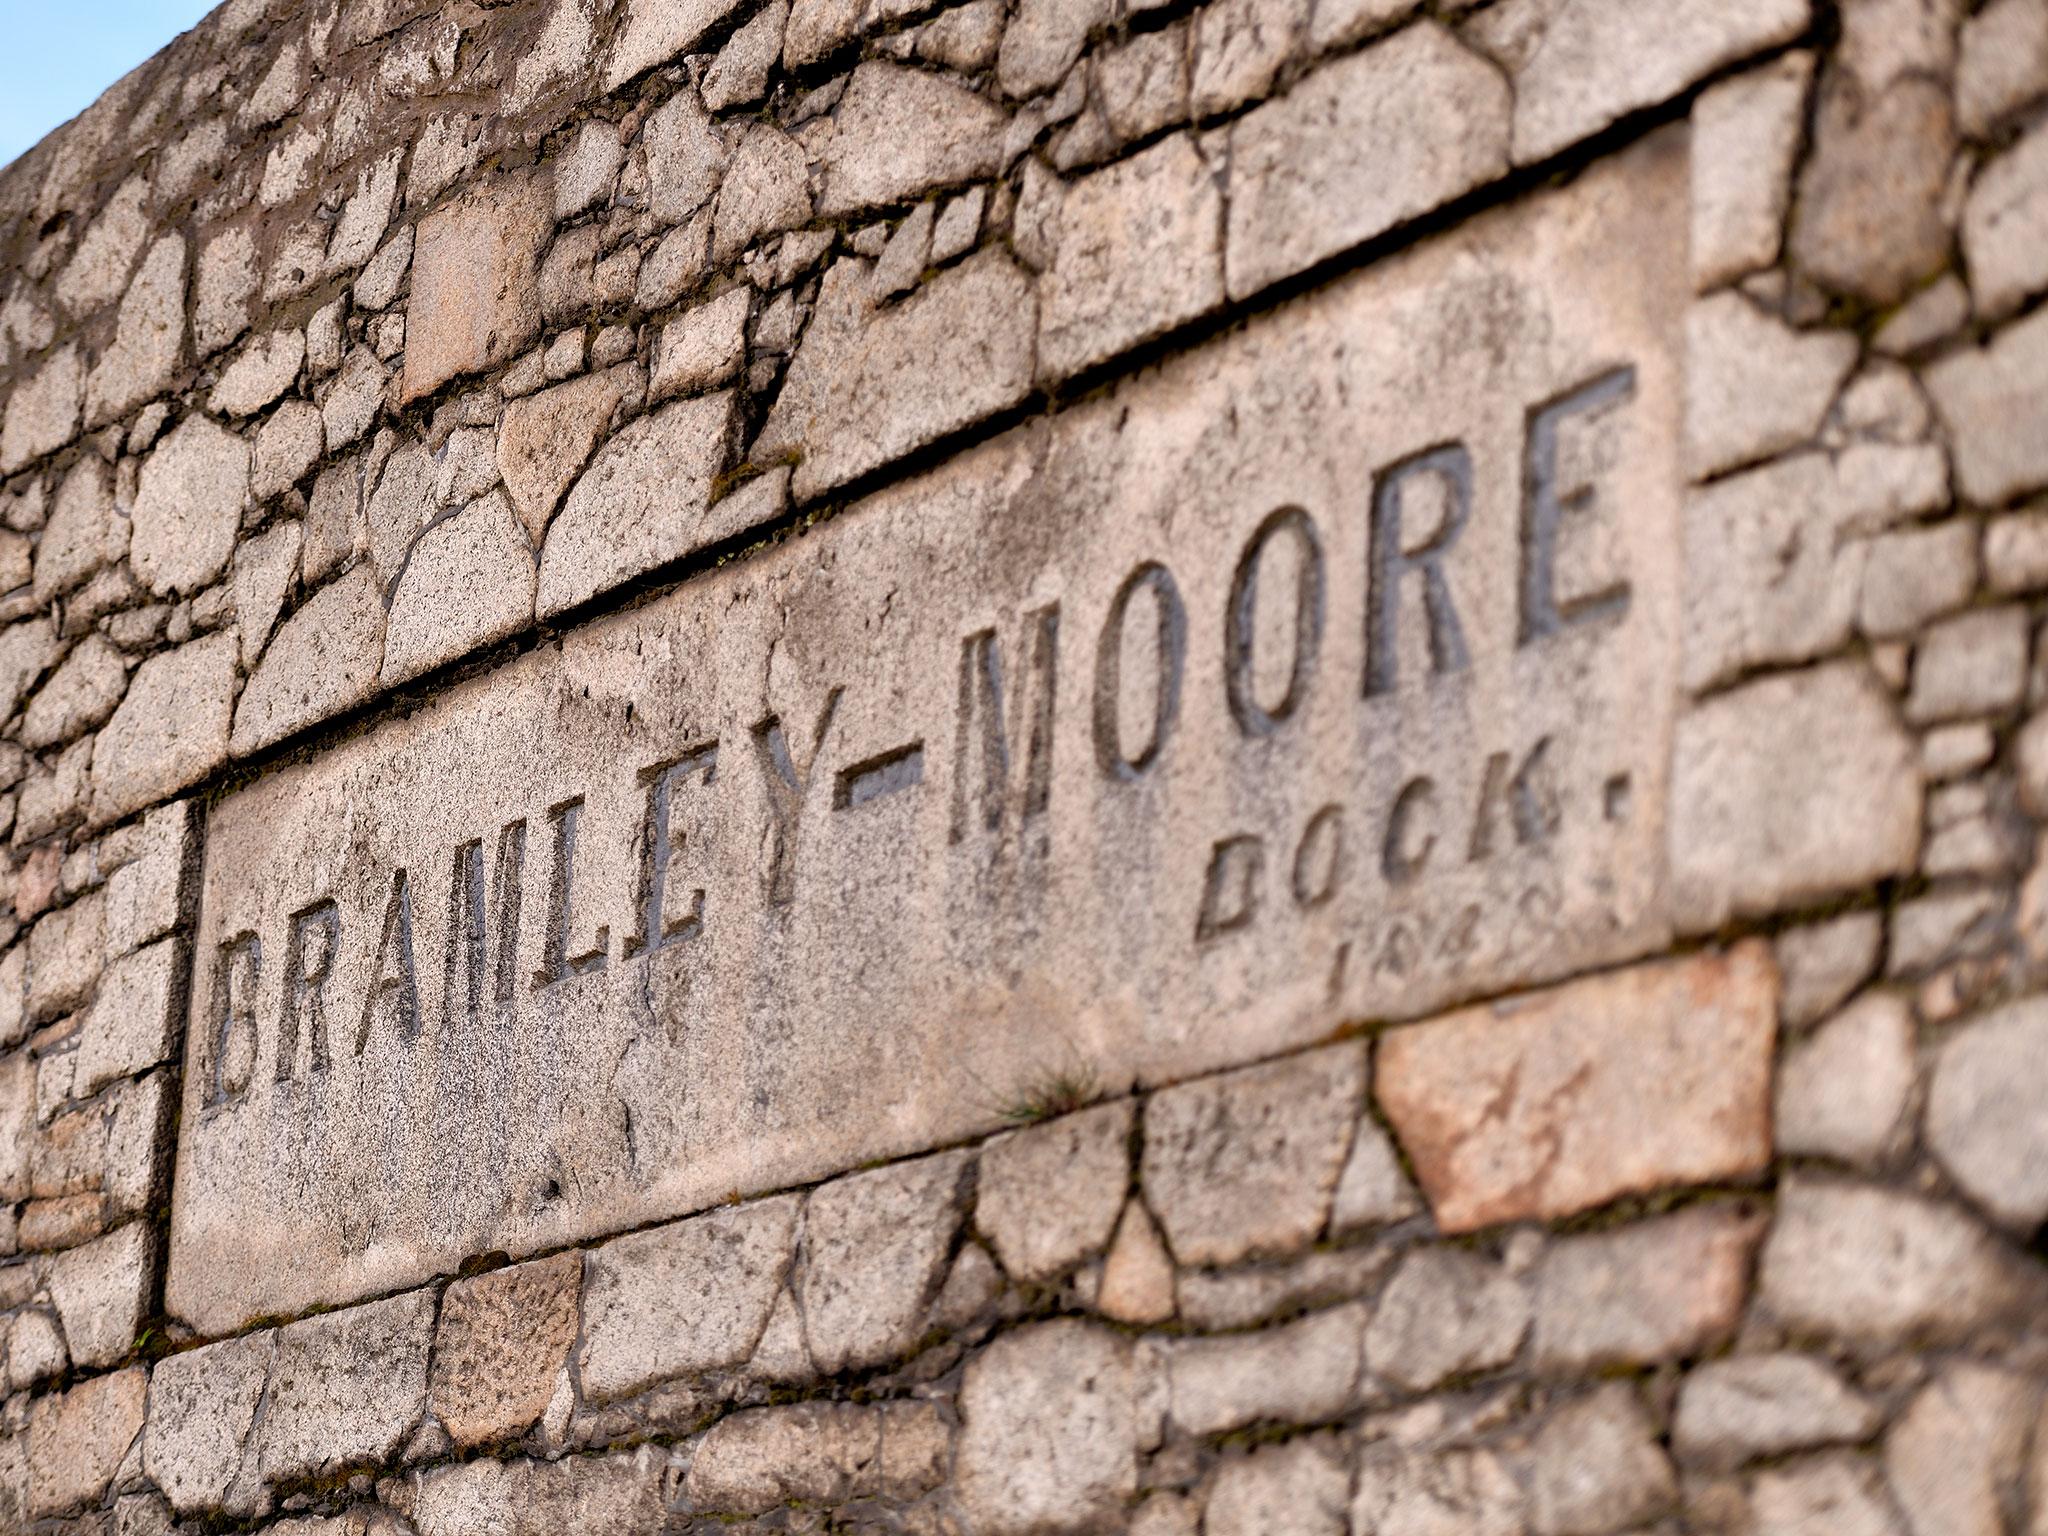 Everton are set to move to a new stadium at the Bramley Moore dock